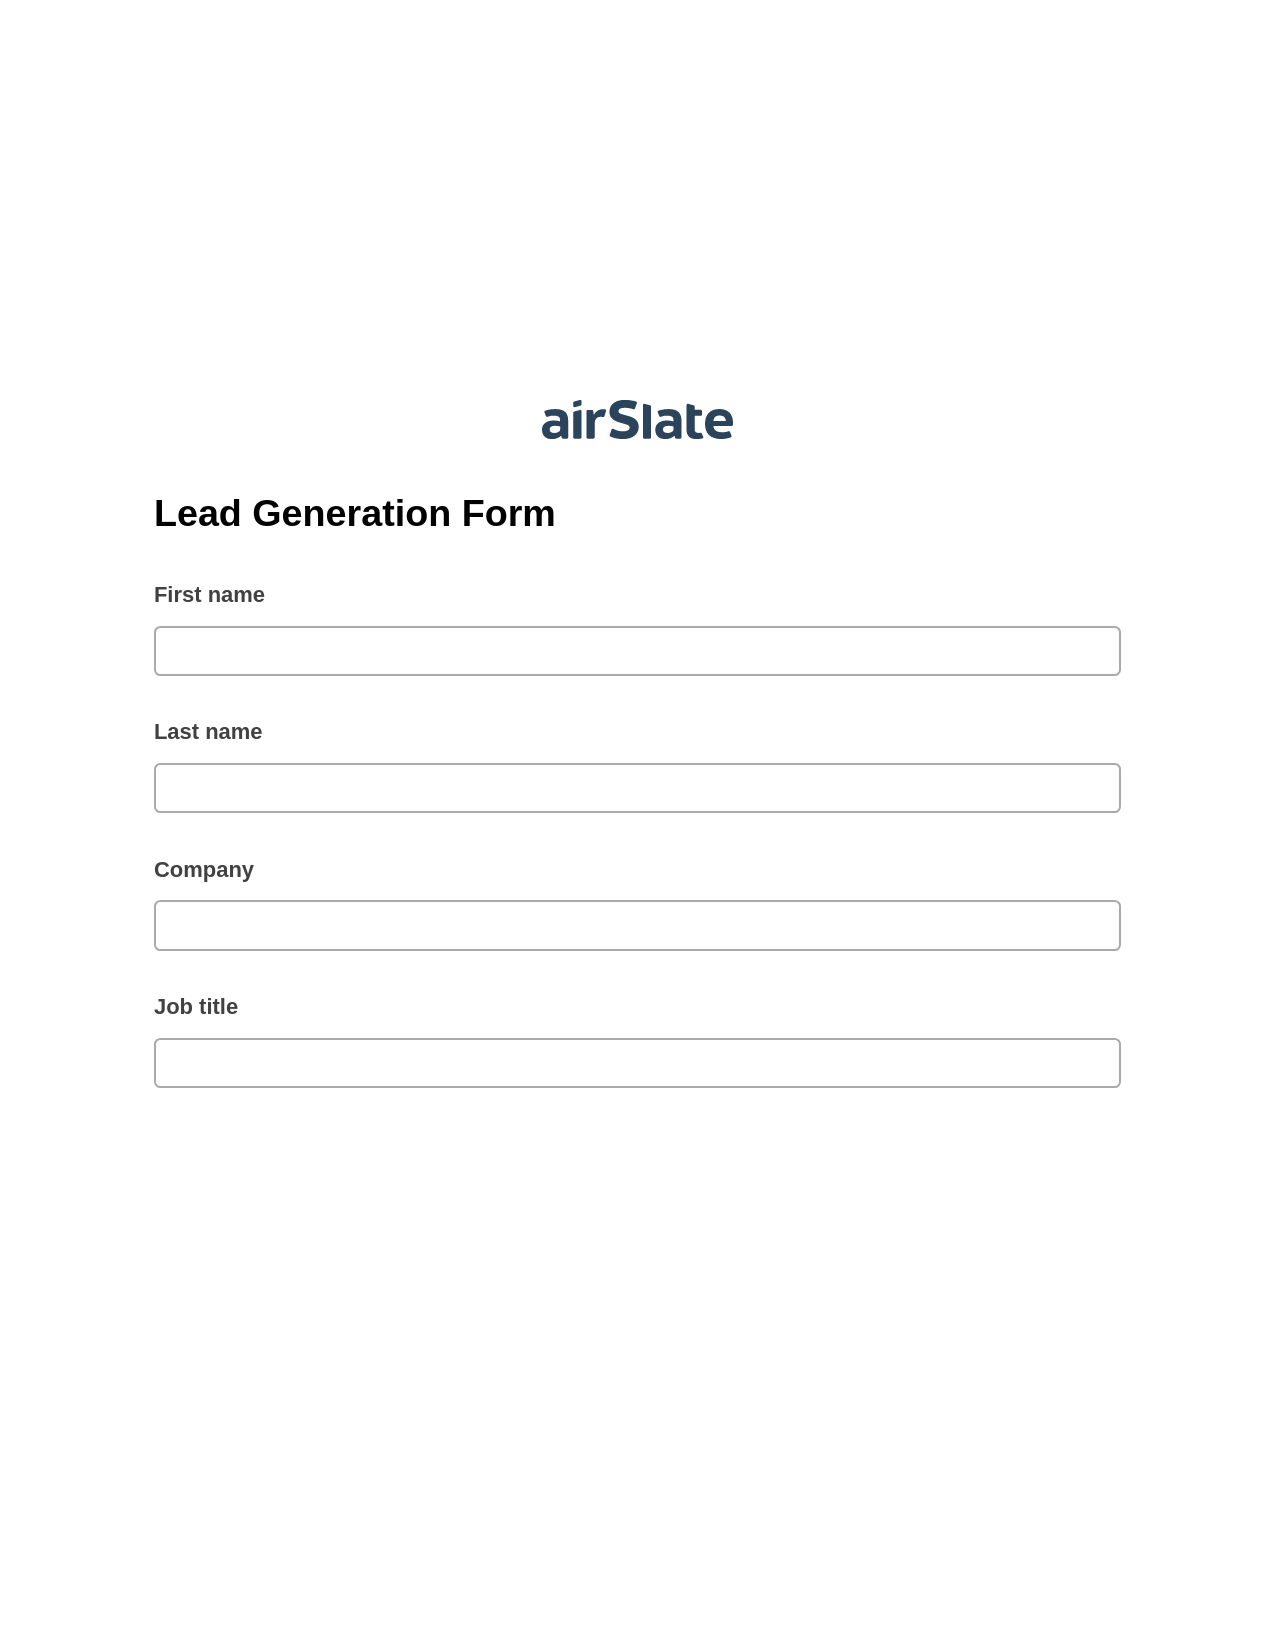 Lead Generation Form Pre-fill Dropdowns from Google Sheet Bot, Send a Slate with Roles Bot, Archive to OneDrive Bot